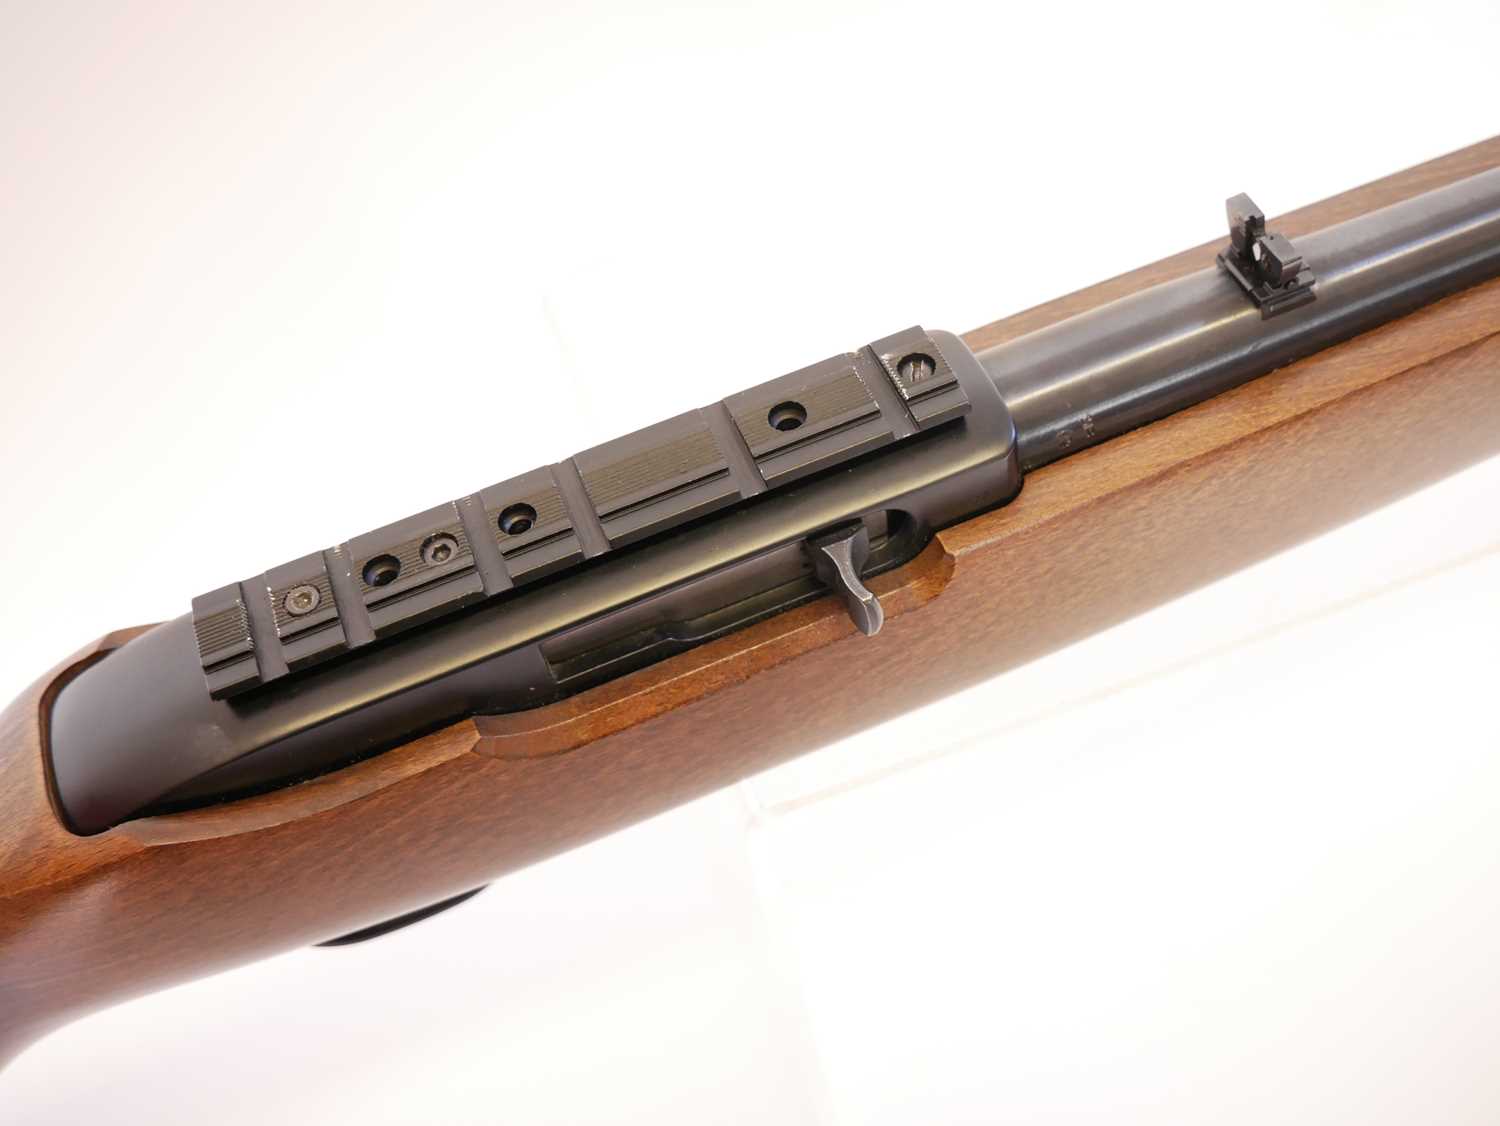 Ruger 10-22 .22lr semi auto rifle and moderator, serial number 356-73813, 16.5inch barrel fitted - Image 5 of 11